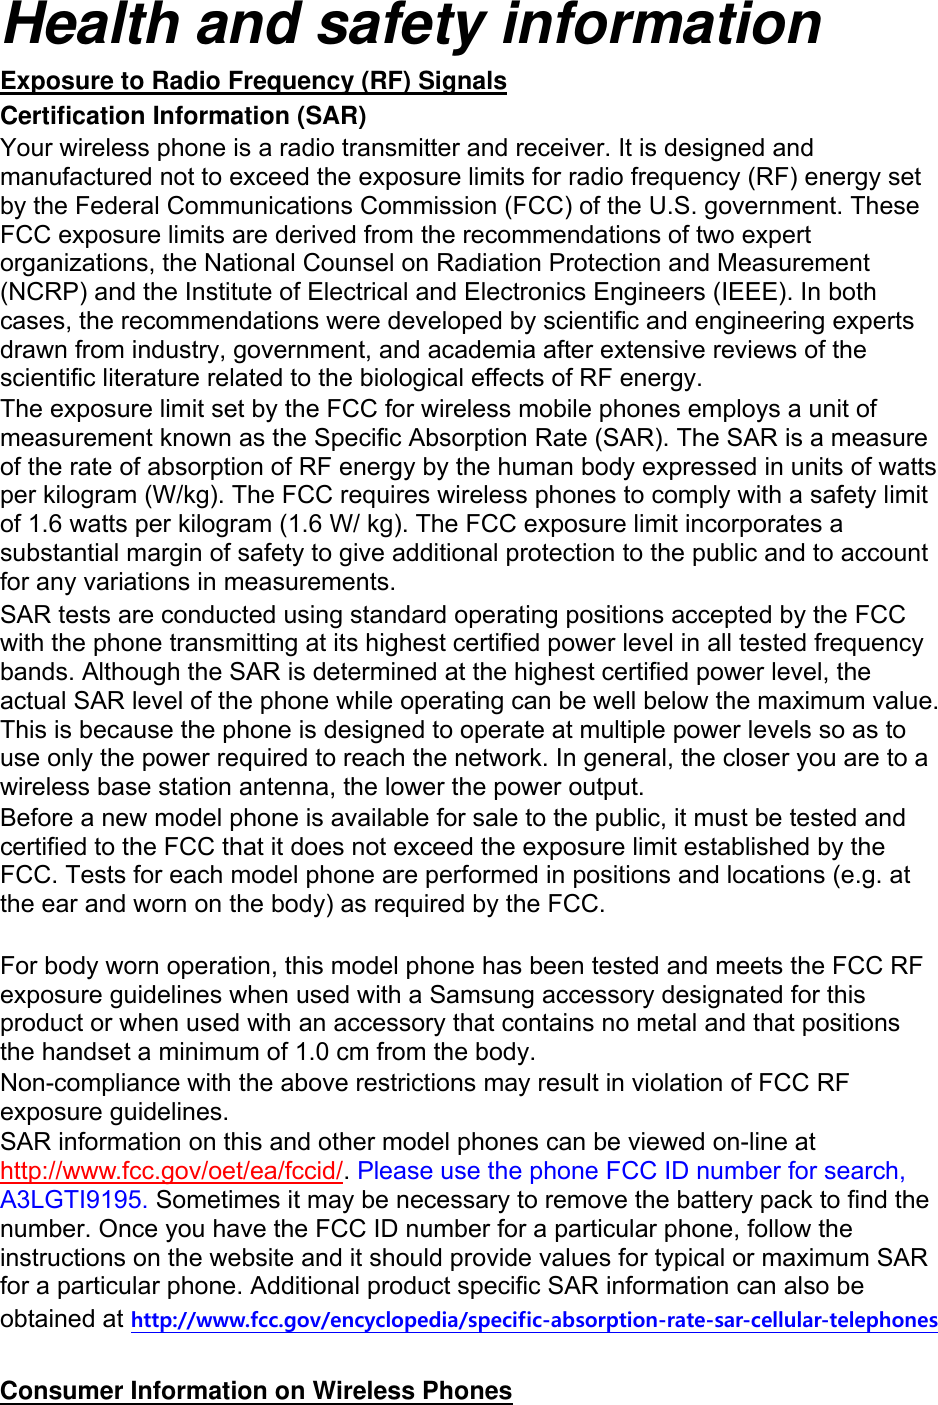 Health and safety information Exposure to Radio Frequency (RF) Signals Certification Information (SAR) Your wireless phone is a radio transmitter and receiver. It is designed and manufactured not to exceed the exposure limits for radio frequency (RF) energy set by the Federal Communications Commission (FCC) of the U.S. government. These FCC exposure limits are derived from the recommendations of two expert organizations, the National Counsel on Radiation Protection and Measurement (NCRP) and the Institute of Electrical and Electronics Engineers (IEEE). In both cases, the recommendations were developed by scientific and engineering experts drawn from industry, government, and academia after extensive reviews of the scientific literature related to the biological effects of RF energy. The exposure limit set by the FCC for wireless mobile phones employs a unit of measurement known as the Specific Absorption Rate (SAR). The SAR is a measure of the rate of absorption of RF energy by the human body expressed in units of watts per kilogram (W/kg). The FCC requires wireless phones to comply with a safety limit of 1.6 watts per kilogram (1.6 W/ kg). The FCC exposure limit incorporates a substantial margin of safety to give additional protection to the public and to account for any variations in measurements. SAR tests are conducted using standard operating positions accepted by the FCC with the phone transmitting at its highest certified power level in all tested frequency bands. Although the SAR is determined at the highest certified power level, the actual SAR level of the phone while operating can be well below the maximum value. This is because the phone is designed to operate at multiple power levels so as to use only the power required to reach the network. In general, the closer you are to a wireless base station antenna, the lower the power output. Before a new model phone is available for sale to the public, it must be tested and certified to the FCC that it does not exceed the exposure limit established by the FCC. Tests for each model phone are performed in positions and locations (e.g. at the ear and worn on the body) as required by the FCC.      For body worn operation, this model phone has been tested and meets the FCC RF exposure guidelines when used with a Samsung accessory designated for this product or when used with an accessory that contains no metal and that positions the handset a minimum of 1.0 cm from the body.   Non-compliance with the above restrictions may result in violation of FCC RF exposure guidelines. SAR information on this and other model phones can be viewed on-line at http://www.fcc.gov/oet/ea/fccid/. Please use the phone FCC ID number for search, A3LGTI9195. Sometimes it may be necessary to remove the battery pack to find the number. Once you have the FCC ID number for a particular phone, follow the instructions on the website and it should provide values for typical or maximum SAR for a particular phone. Additional product specific SAR information can also be obtained at http://www.fcc.gov/encyclopedia/specific-absorption-rate-sar-cellular-telephones  Consumer Information on Wireless Phones 